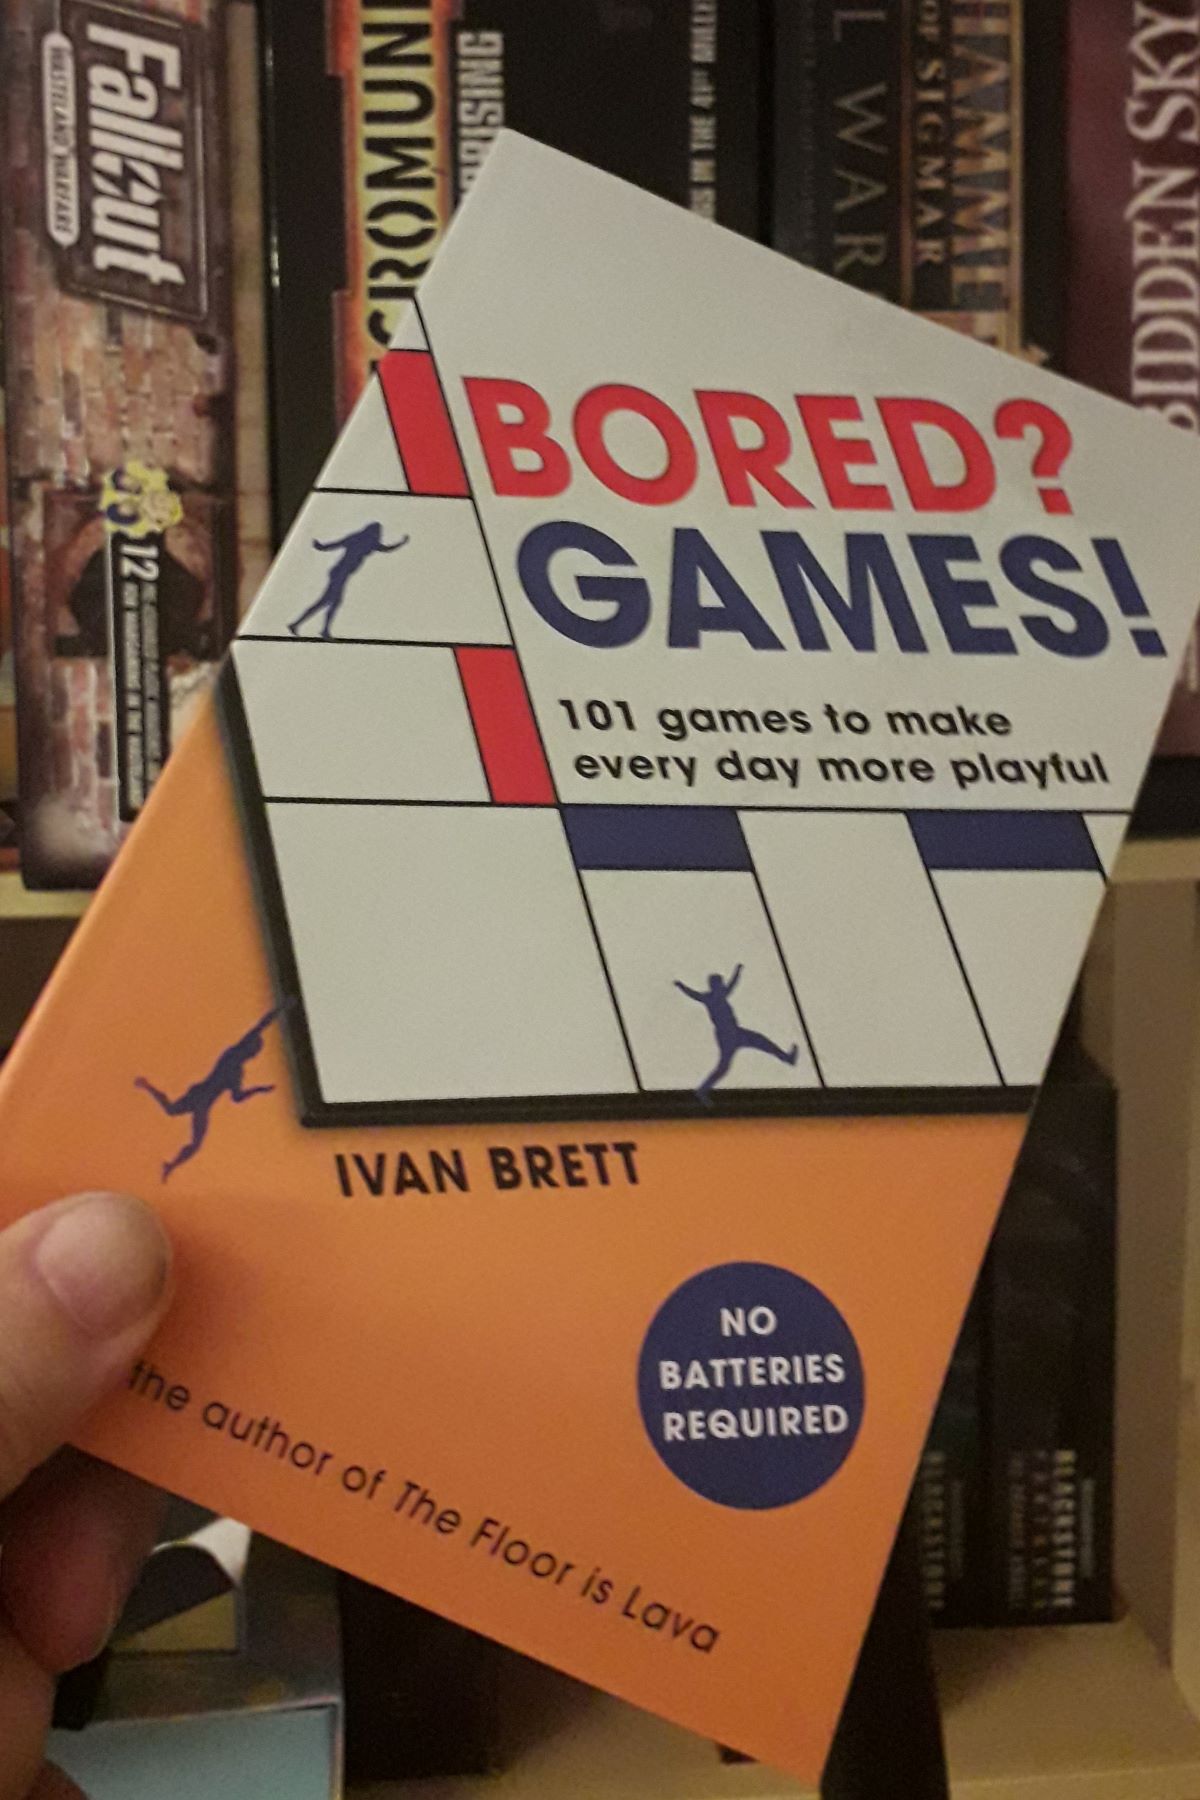 Book Review: Bored? Games! by Ivan Brett